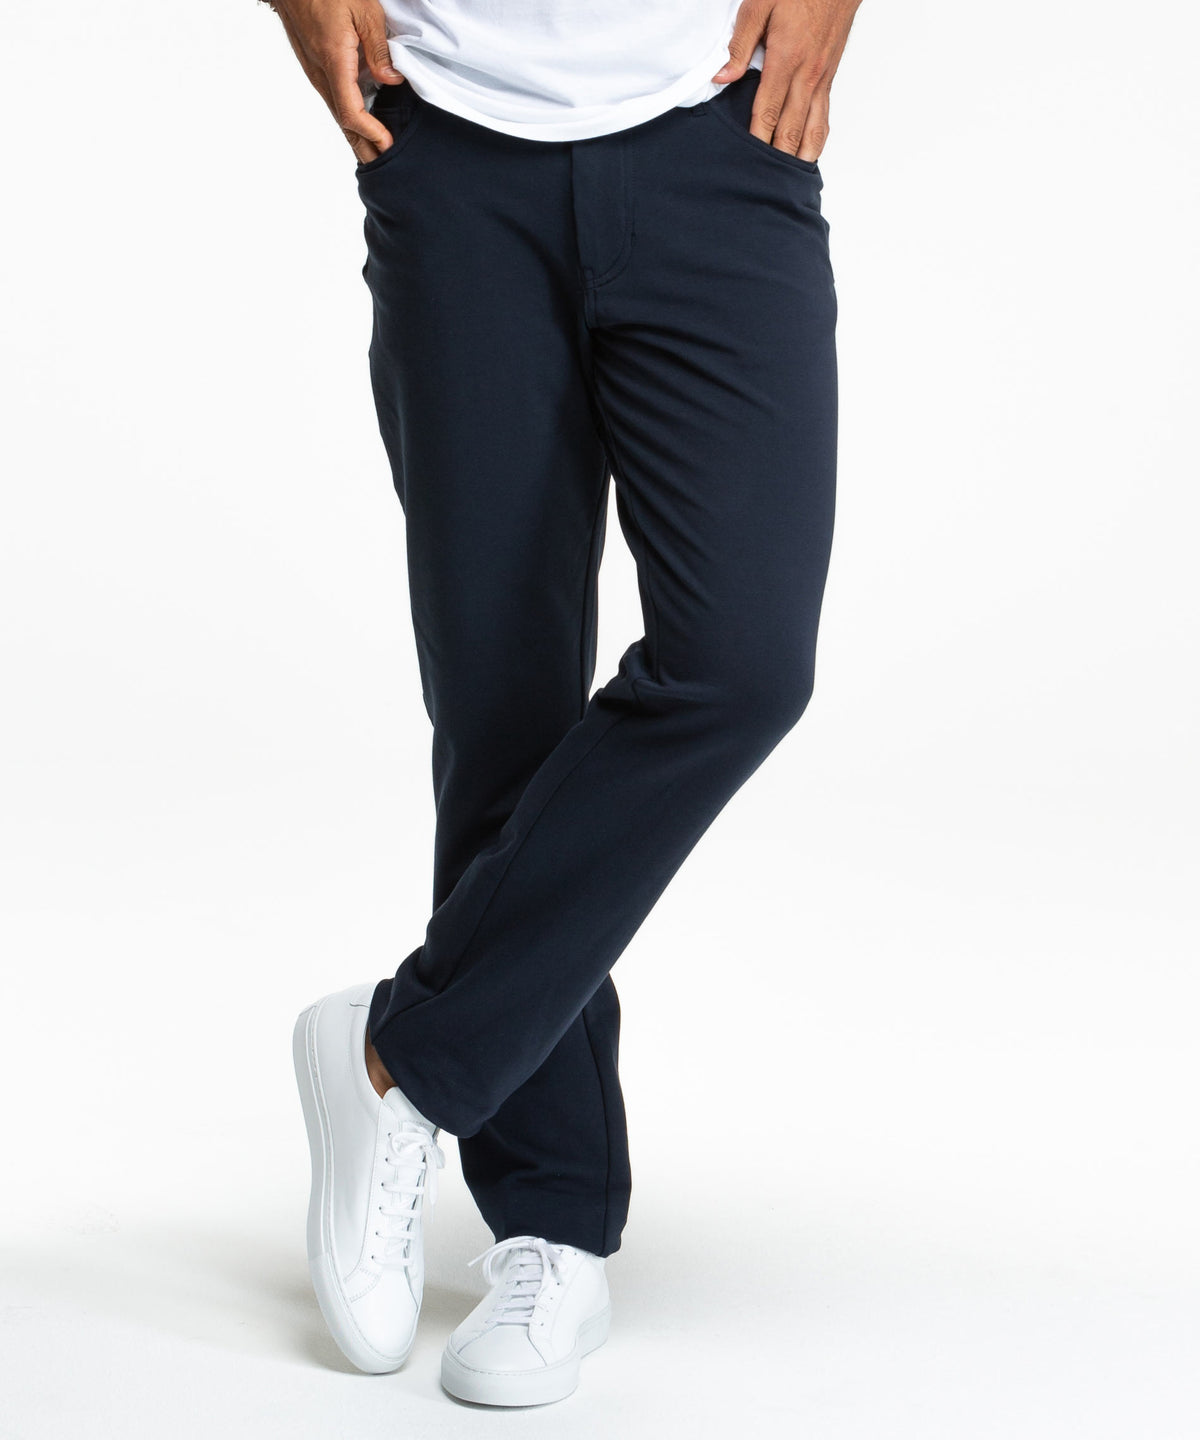 SWET Tailor All-in Stretch 5-Pocket Pant